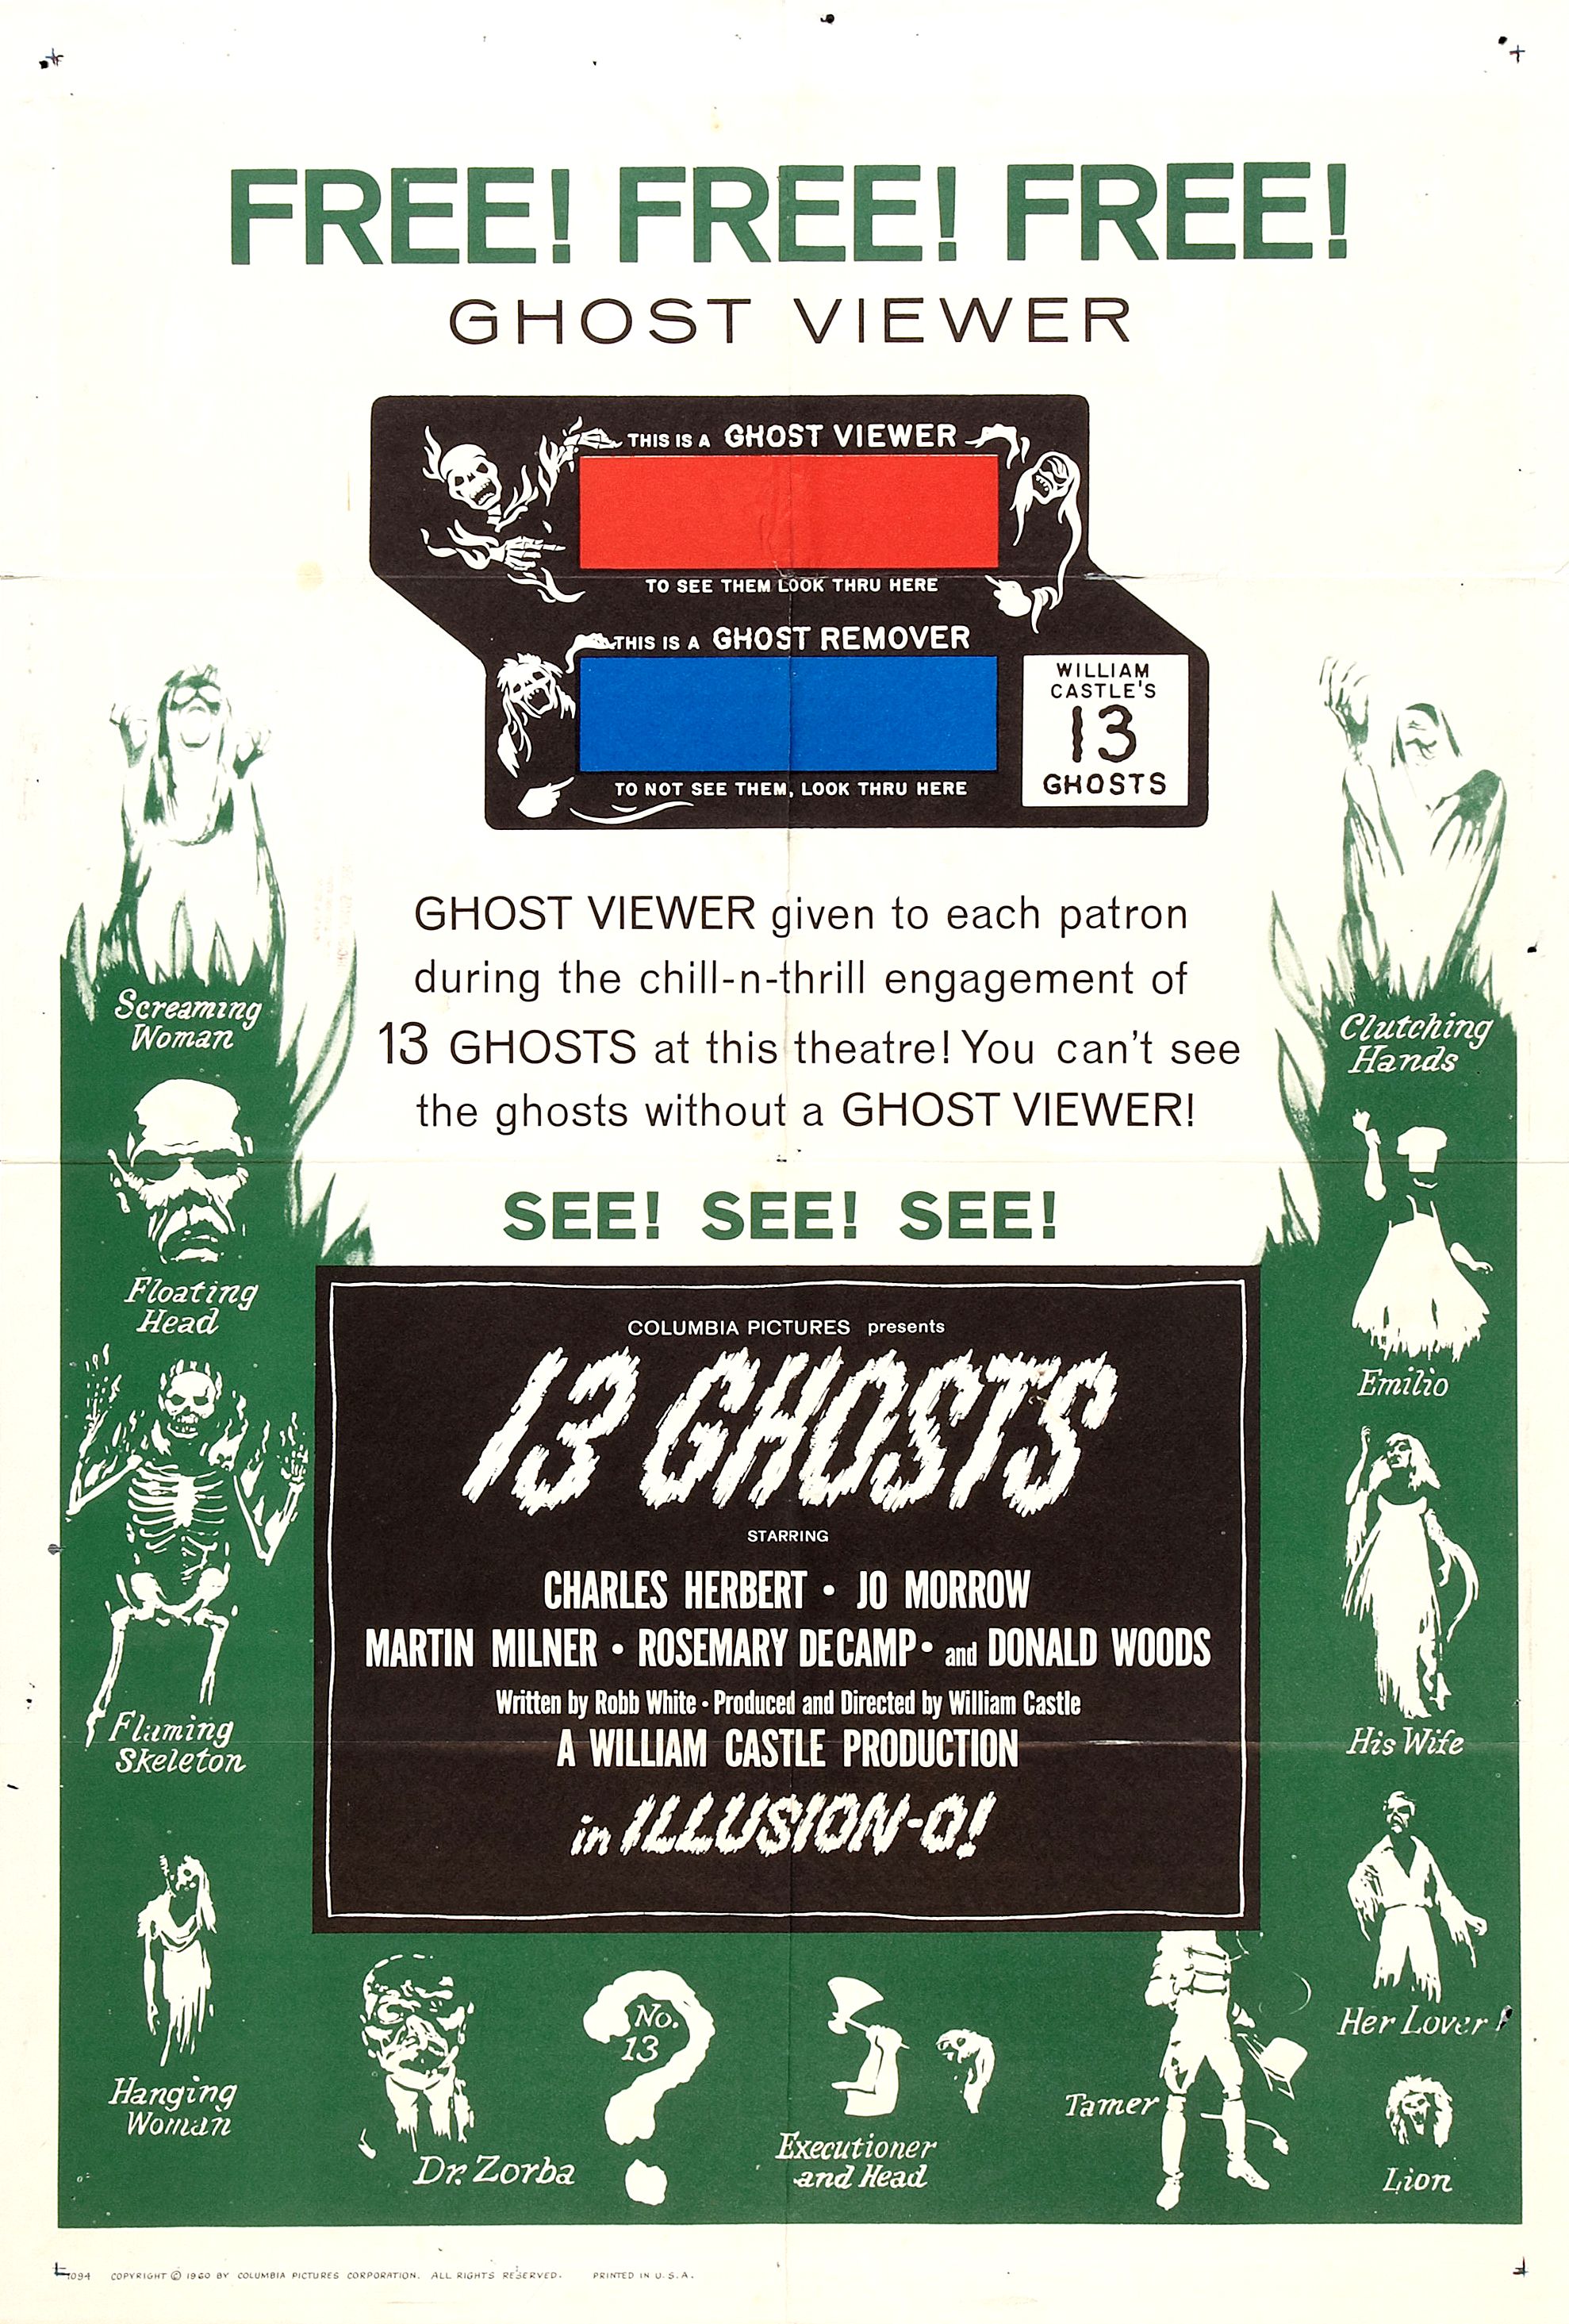 13 ghosts (1960) - Free! Free! Free! Ghost Viewer Ghost Remover 13 a ny Ghost Viewer given to each patron during the chillnthrill engagement of 13 Ghosts at this theatre! You can't see the ghosts without a Ghost Vieweri See! See! See! ant see 13 Ghosts Ch